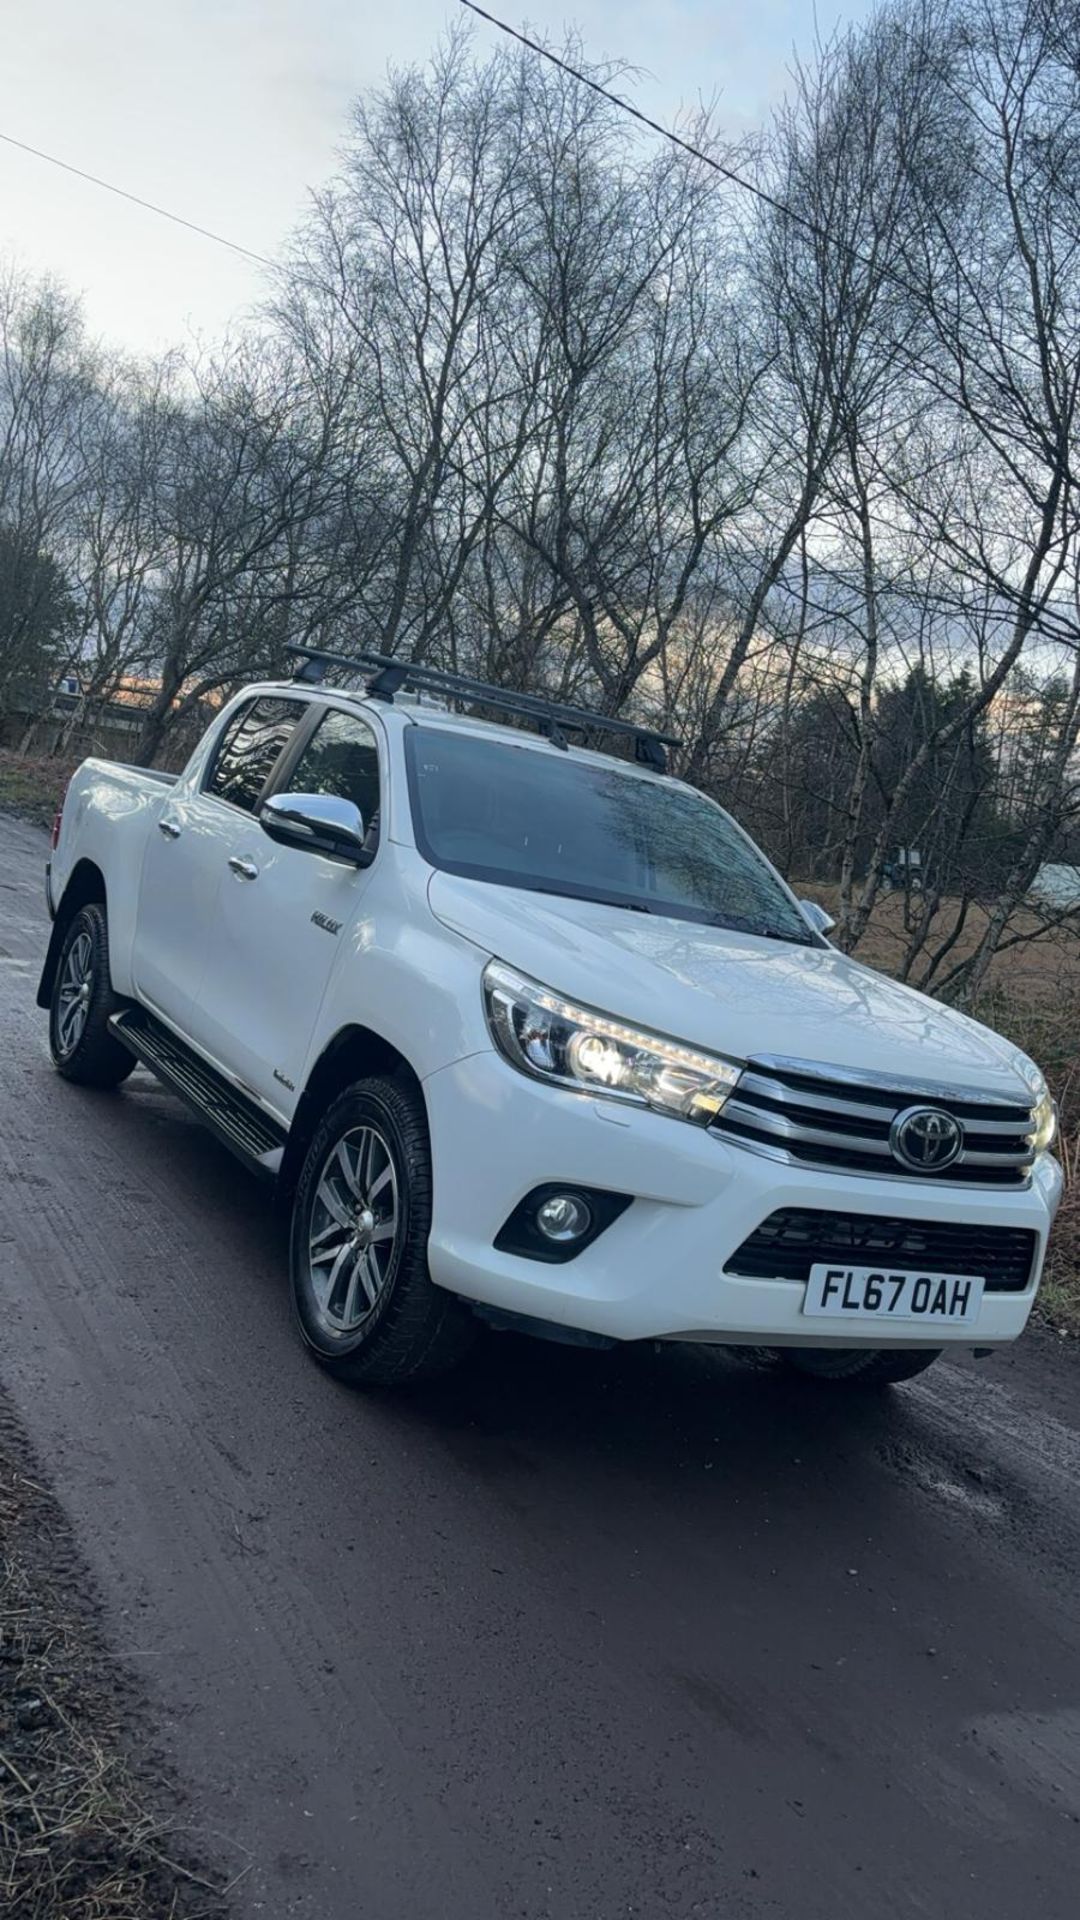 2018 TOYOTA HILUX INVINCIBLE DOUBLE CAB PICKUP TRUCK - Image 9 of 10